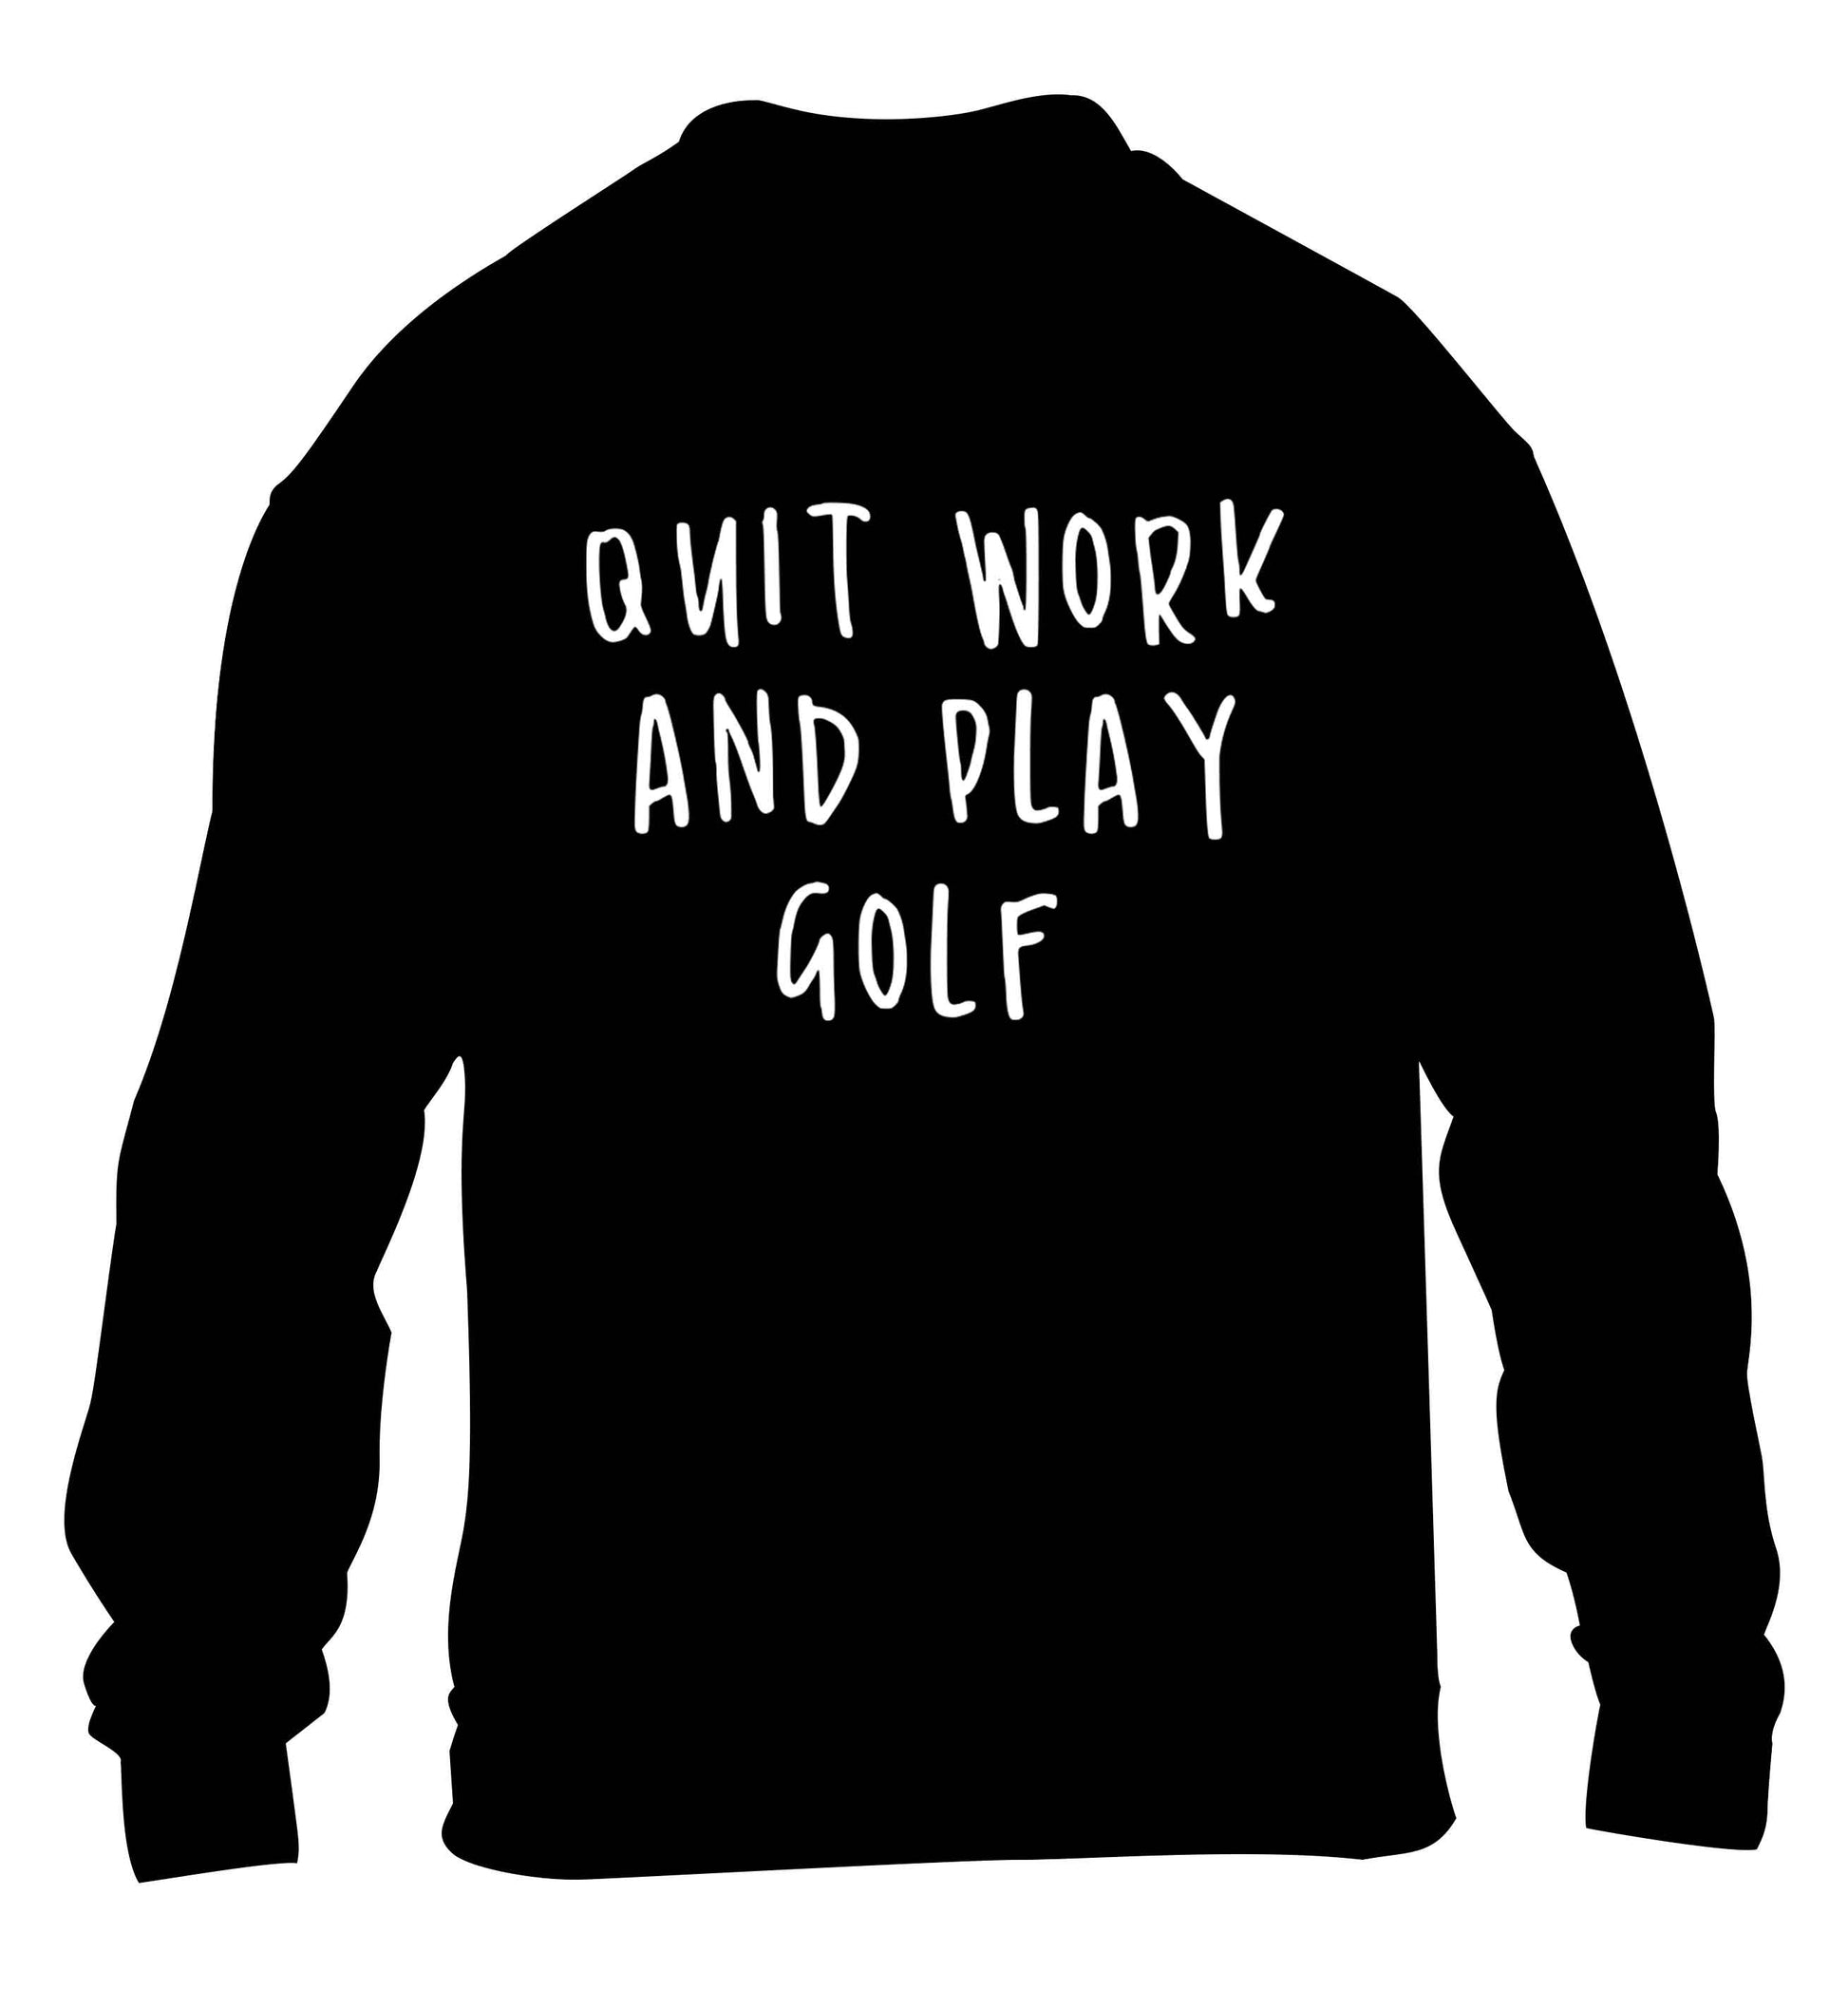 Quit work and play golf children's black sweater 12-13 Years